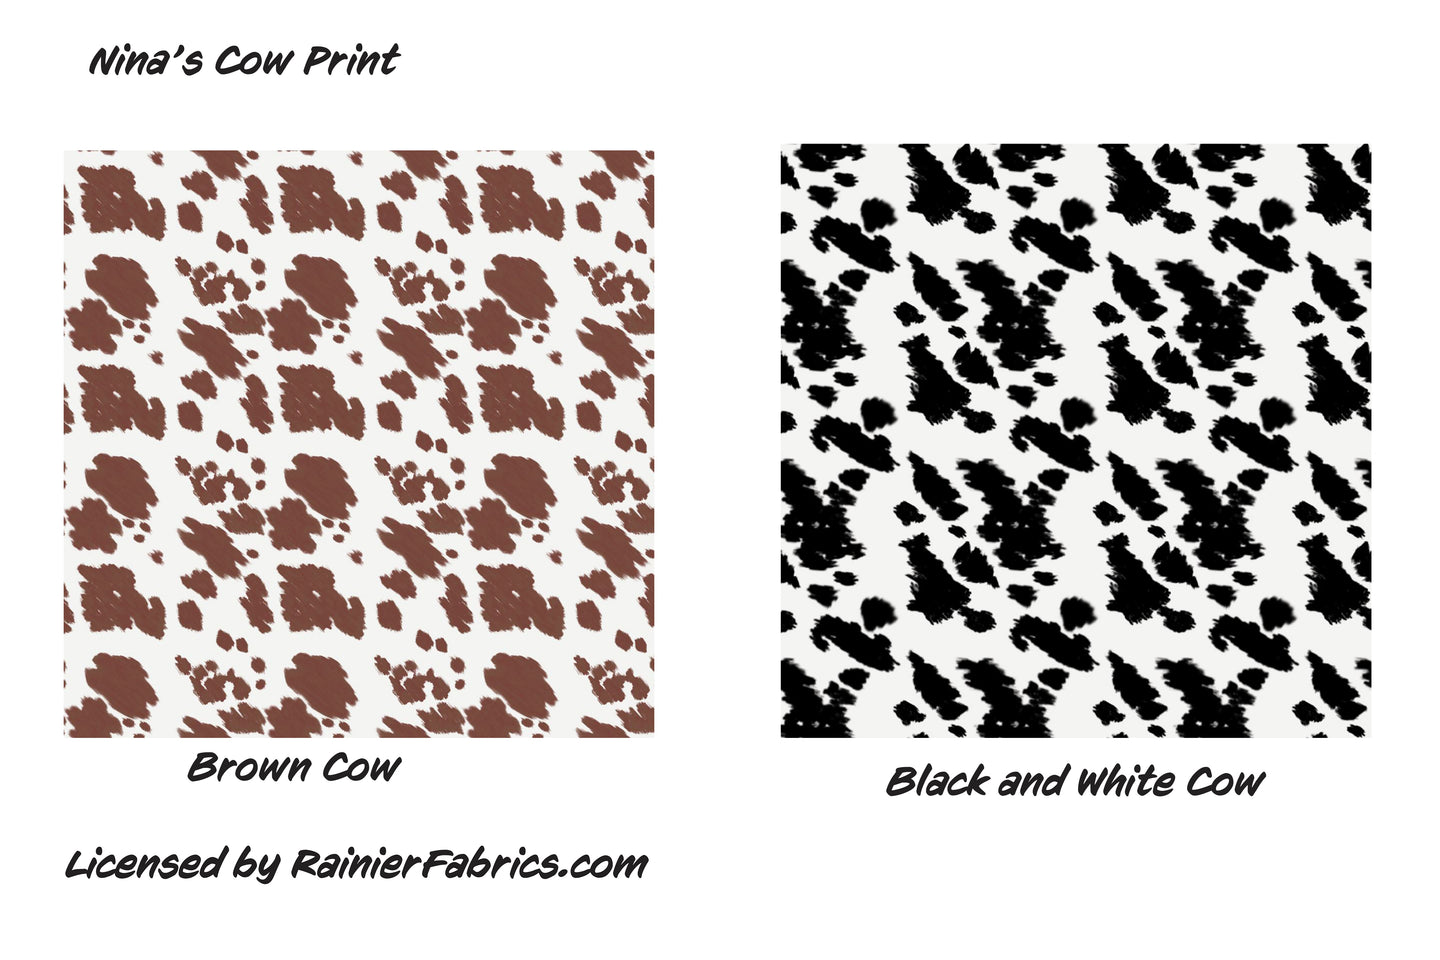 Nina's Cowhide - 2-5 day turnaround - Order by 1/2 yard; Description of bases below